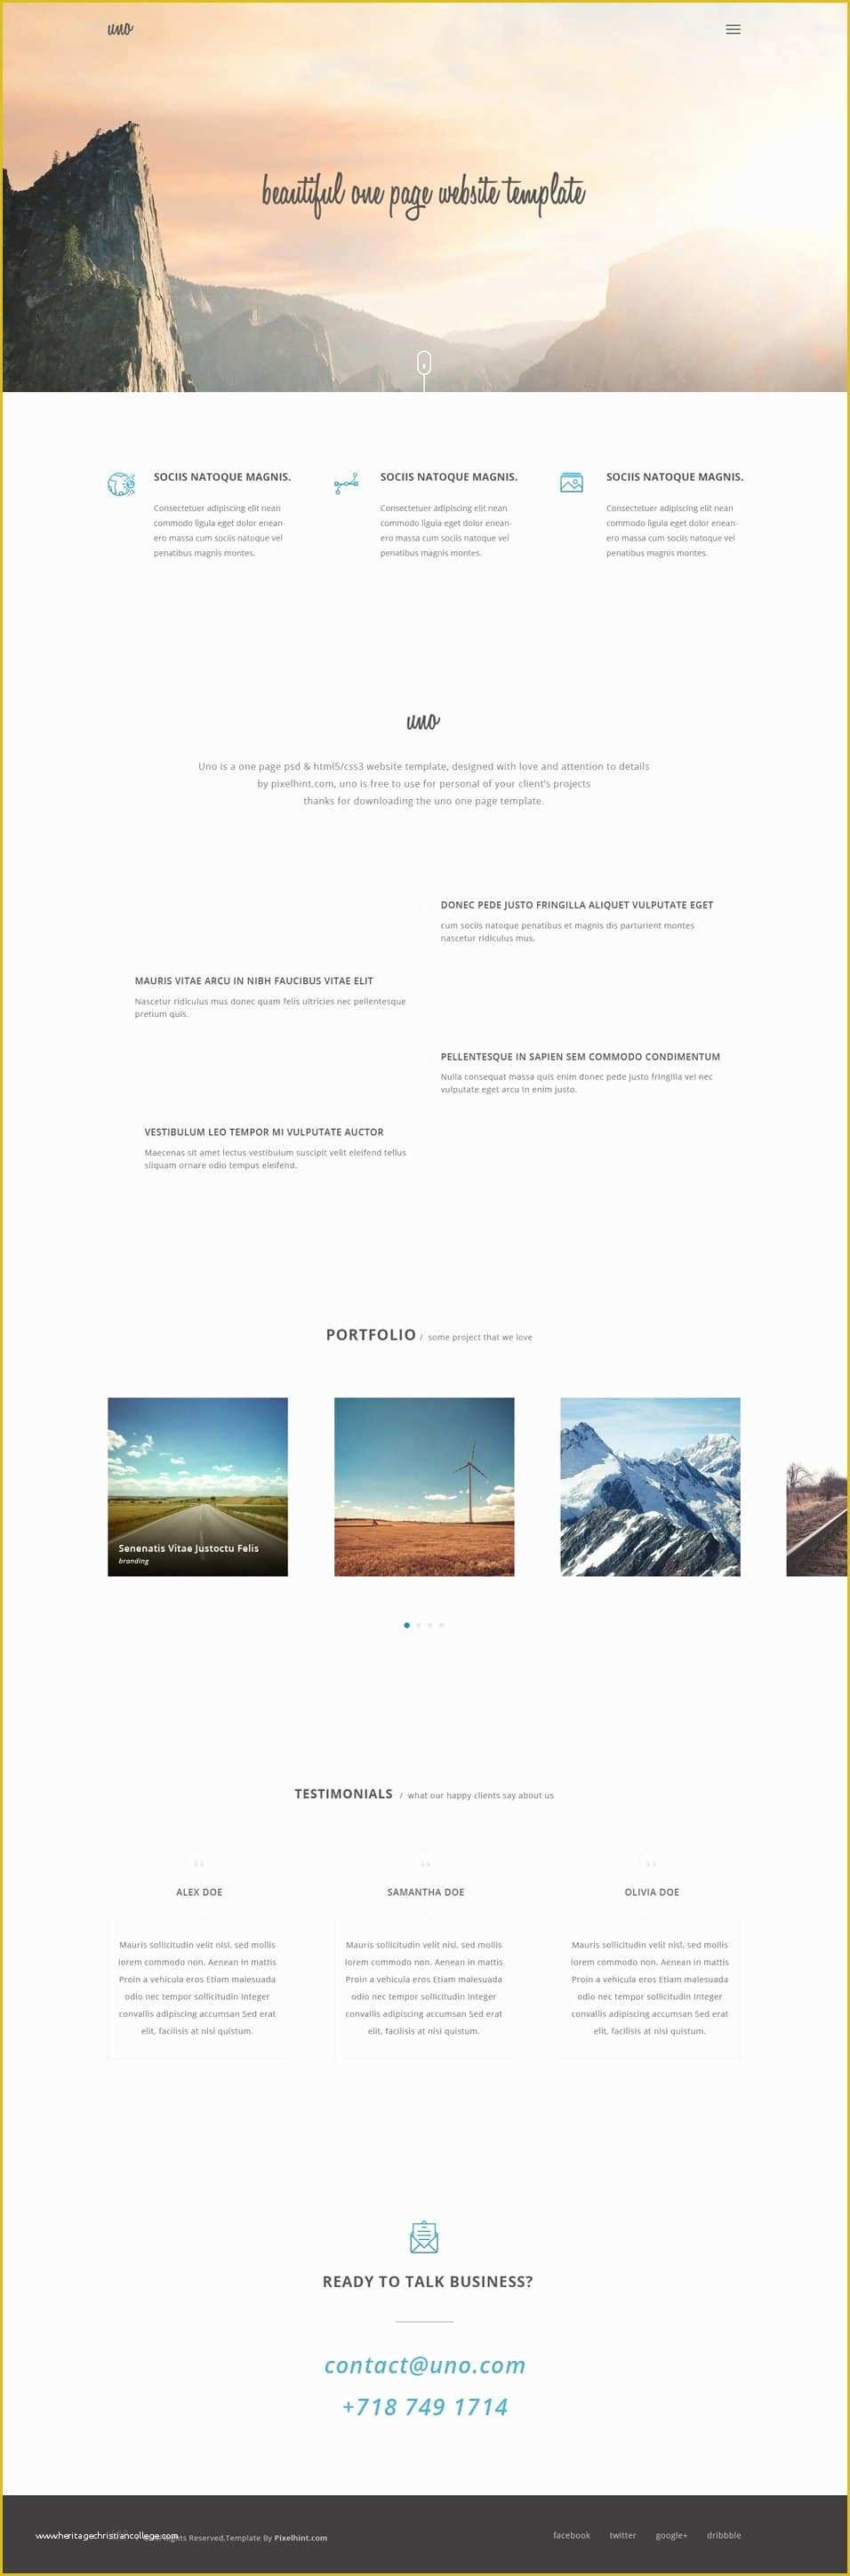 Single Page Website Template Free Of Free Single Page Website Templates Psd Css Author